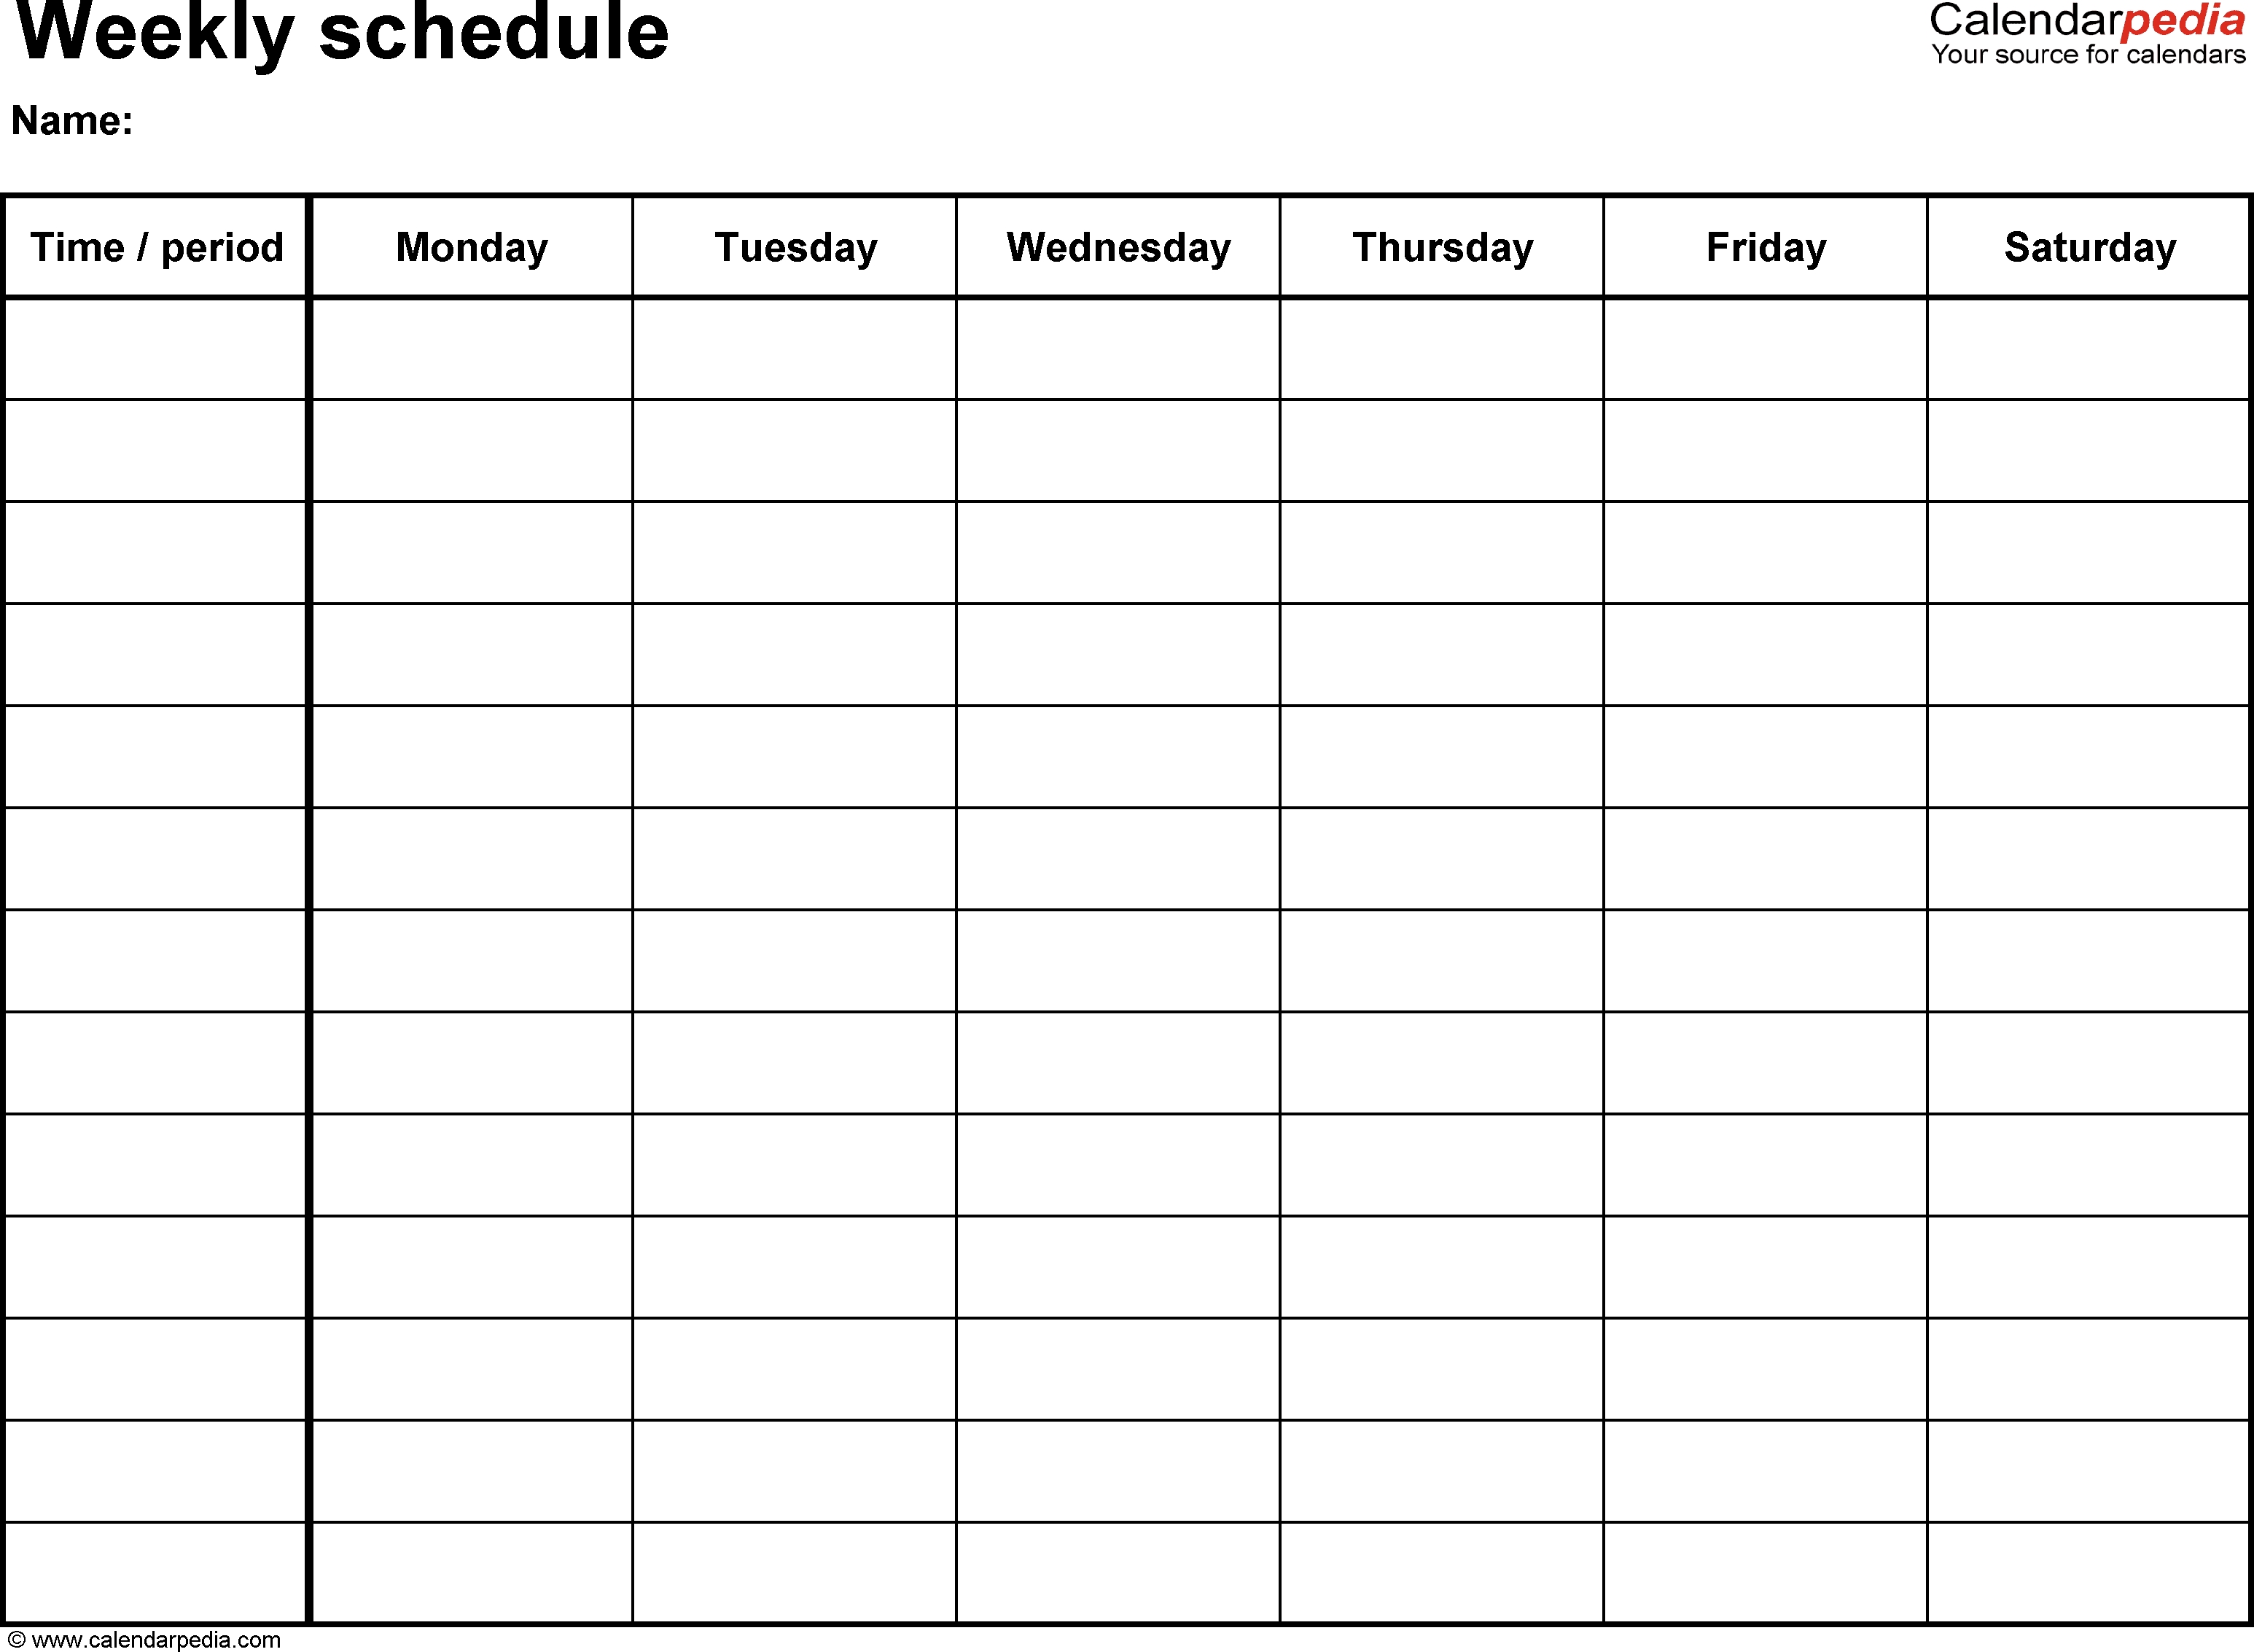 Free Weekly Schedule Templates For Word - 18 Templates-Calendar Template Monday Friday